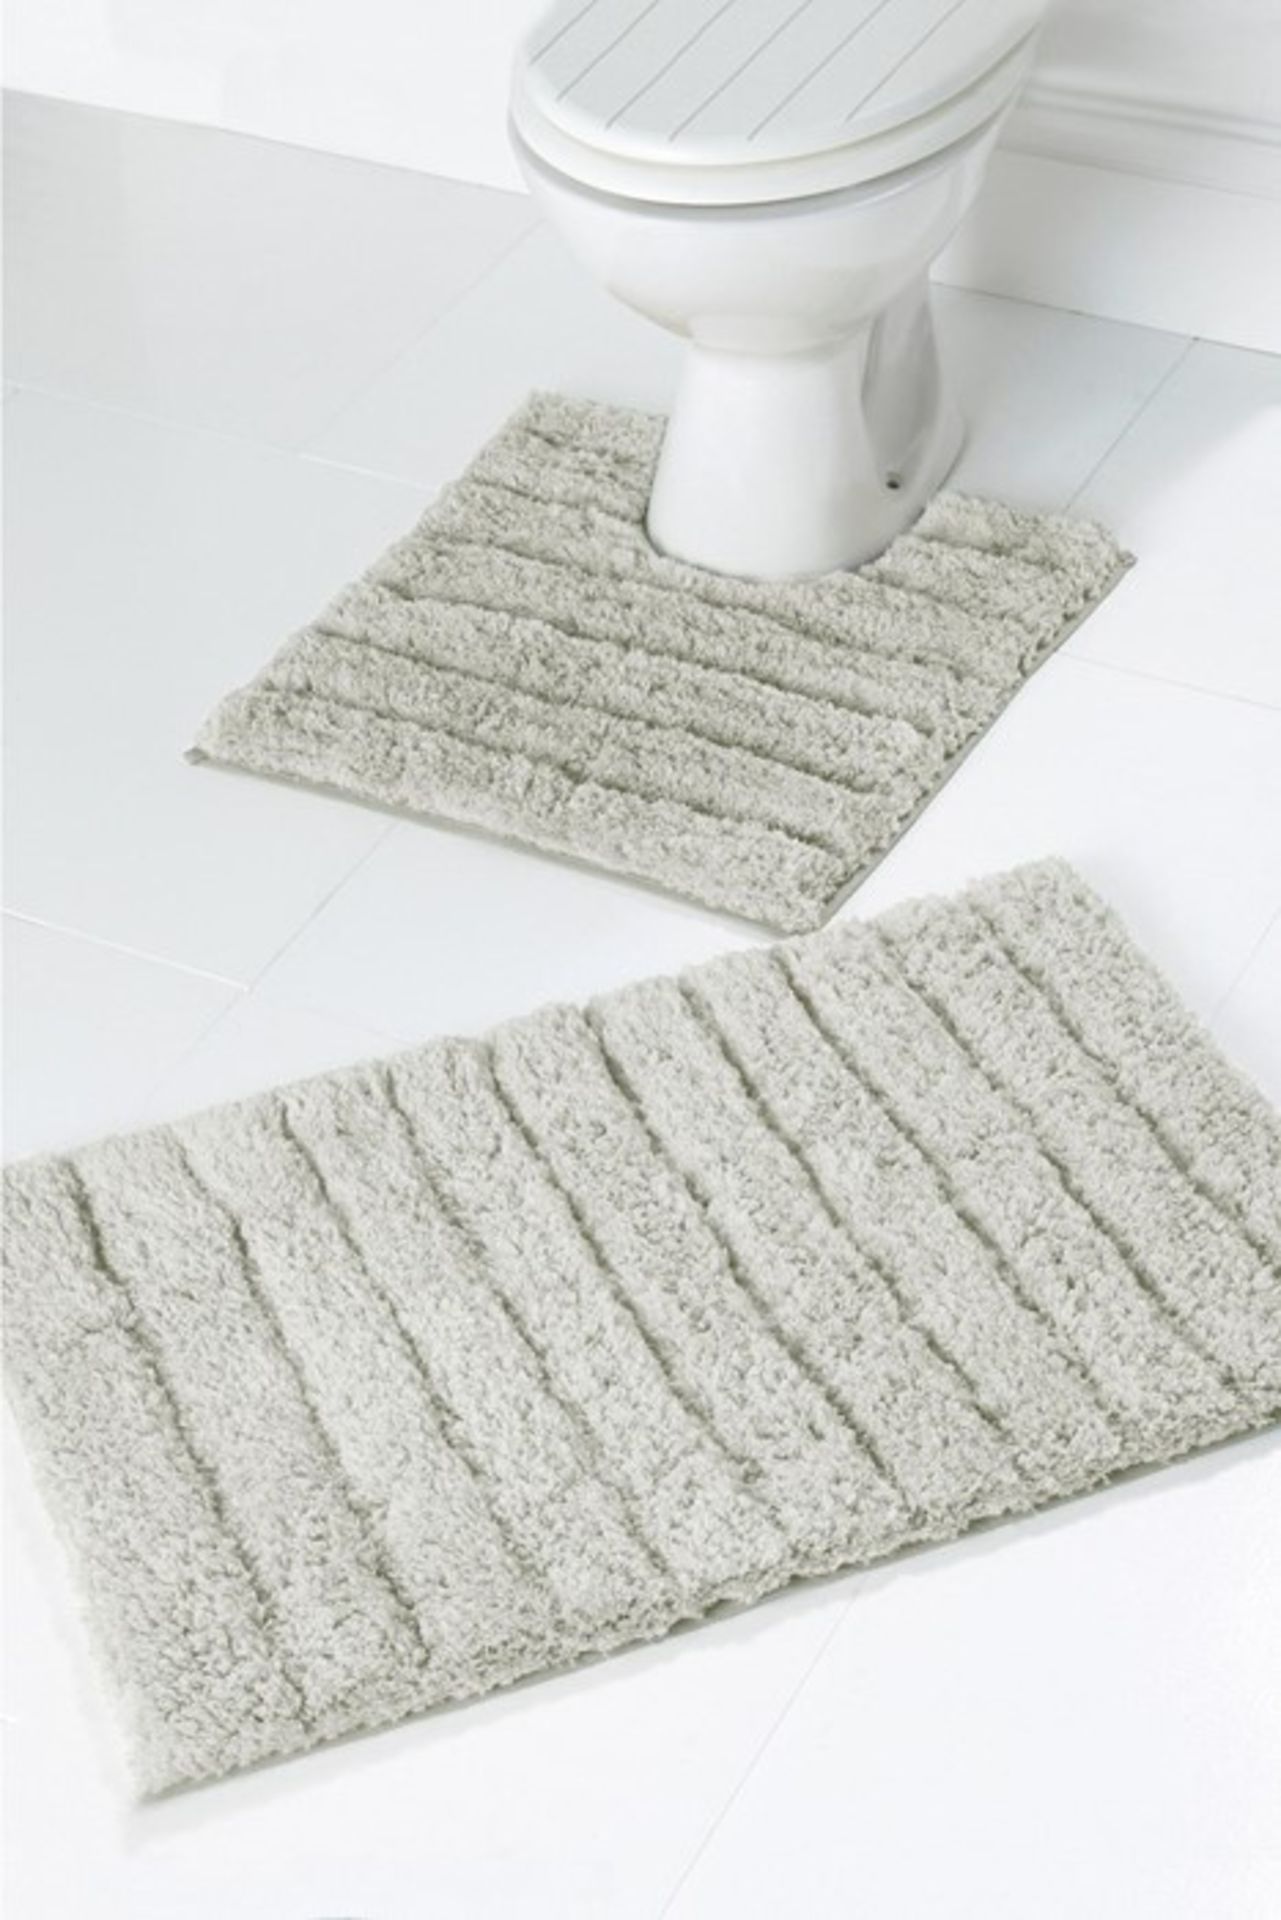 1 BAGGED SUPER SOFT BATH MAT SET IN CREAM (PUBLIC VIEWING AVAILABLE)